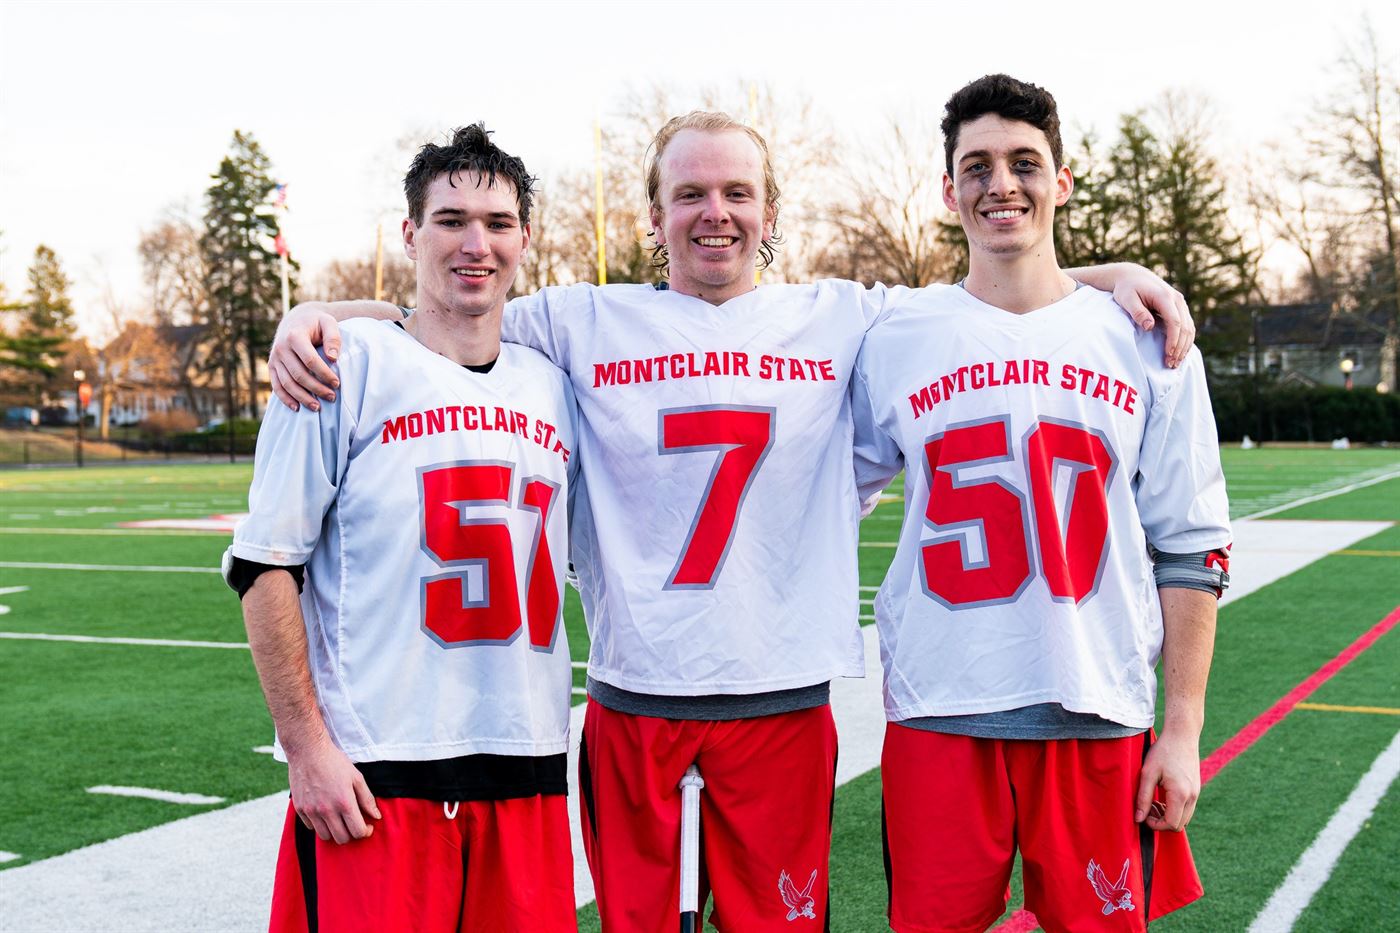 (left to right): Wilson Smith, Christian Boyle and Thomas Roper pose for a photo after a victory against Misericordia on March 16th. Chris Krusberg | The Montclarion